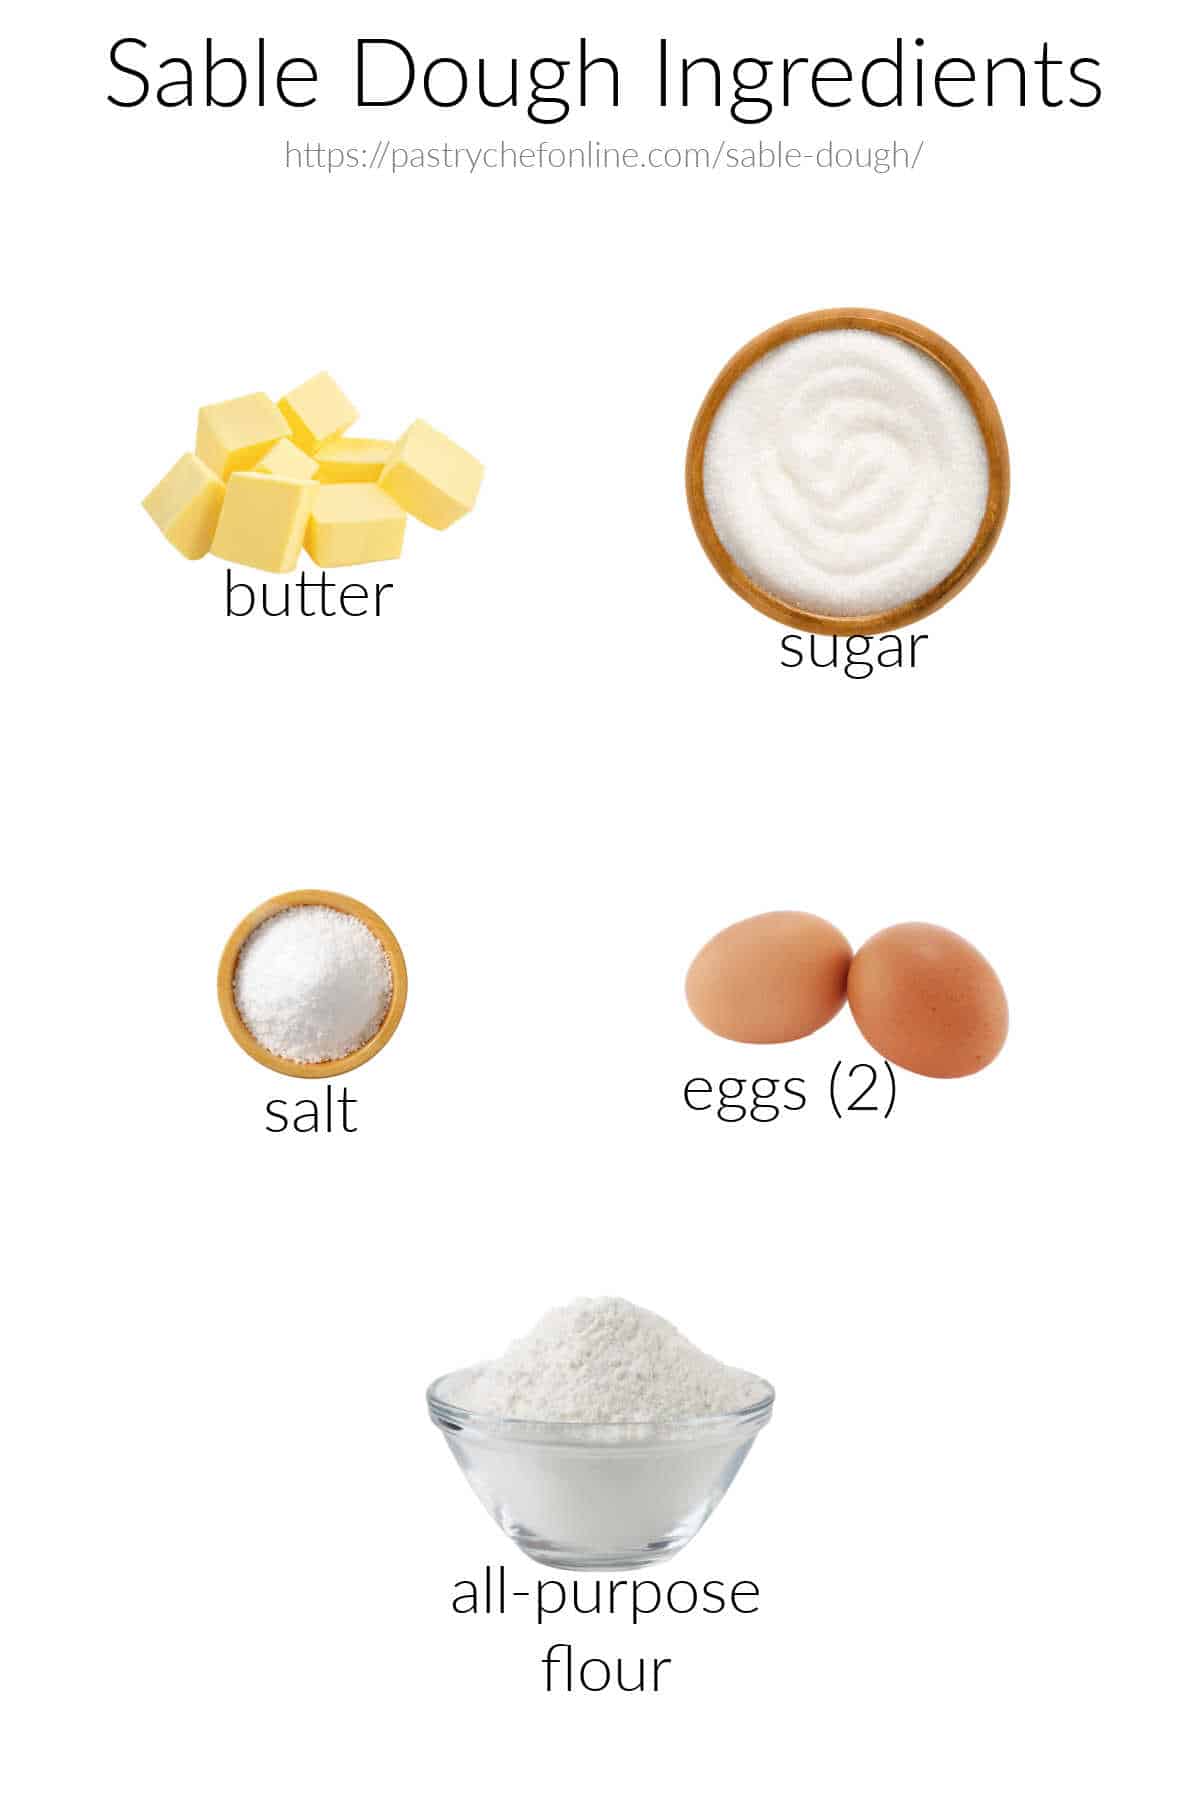 Ingredients for making sable dough, labeled and on a white background: butter, sugar, salt, eggs, and flour.